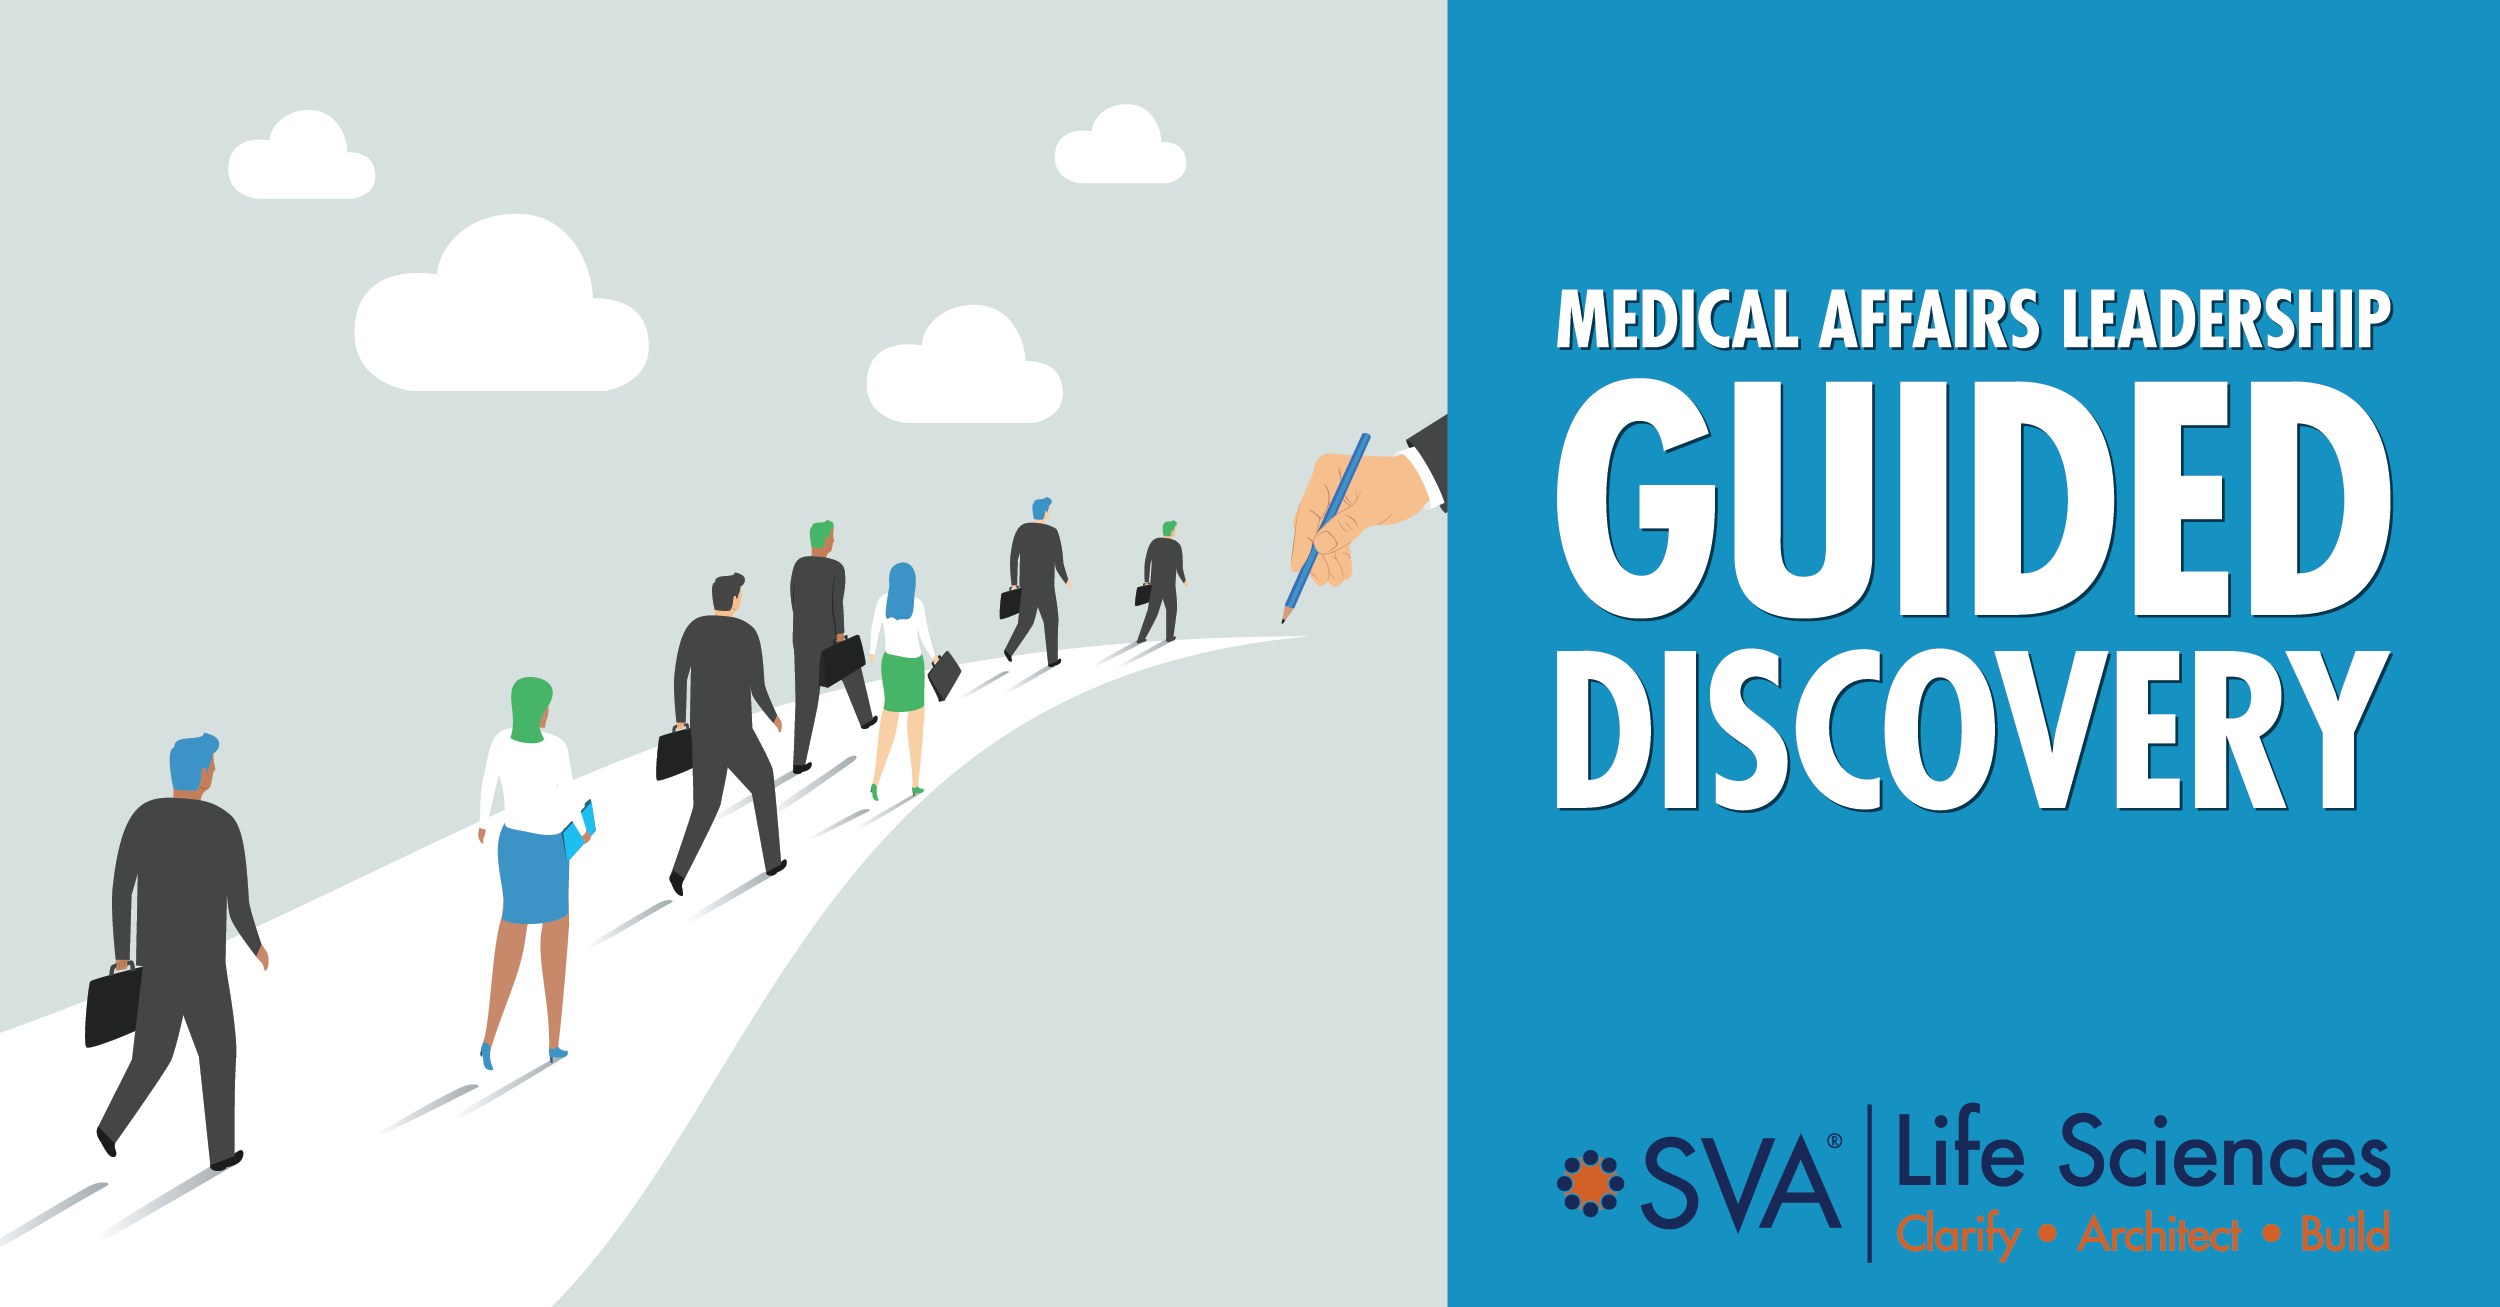 Medical Affairs Leadership Guided Discovery